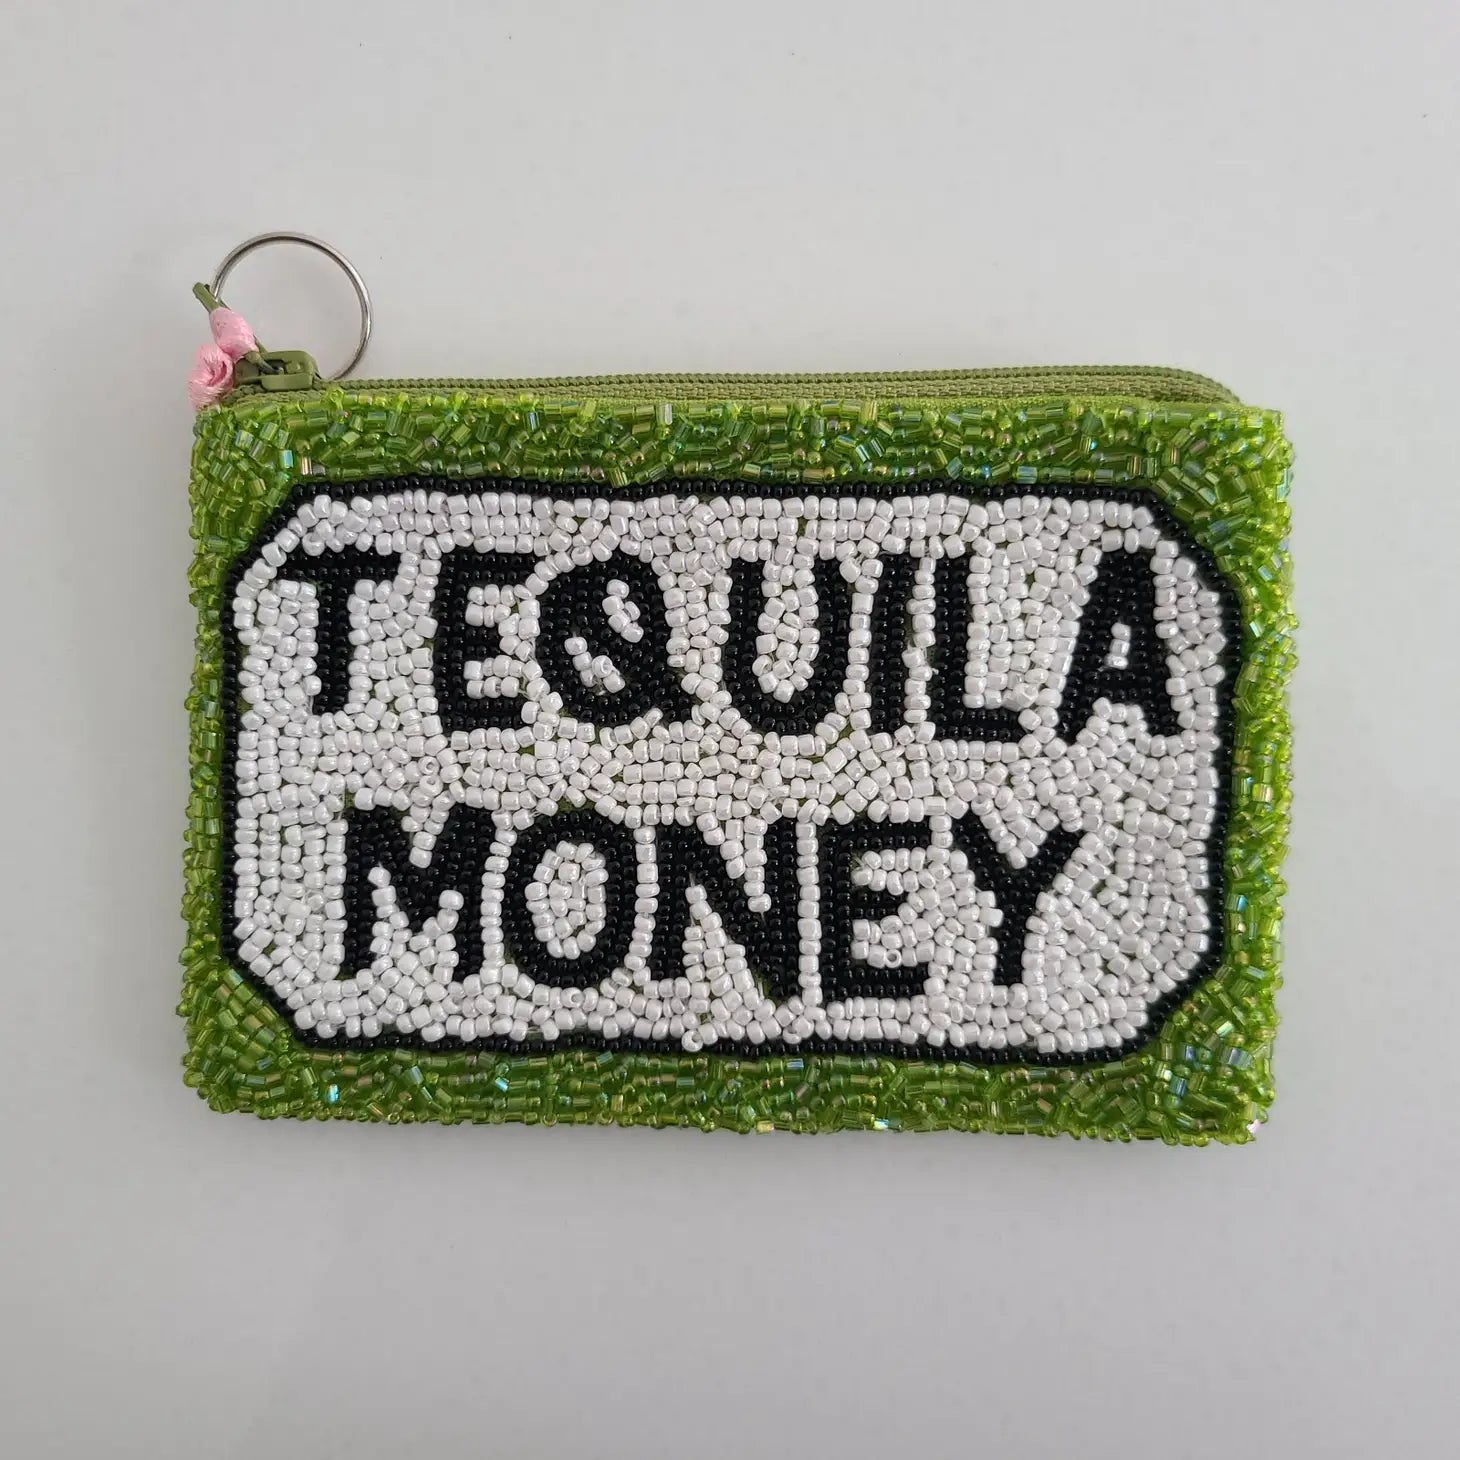 Shop Tiana Designs Hand Beaded Tequila Money Coin Purse - Premium Purse from Tiana New York Online now at Spoiled Brat 